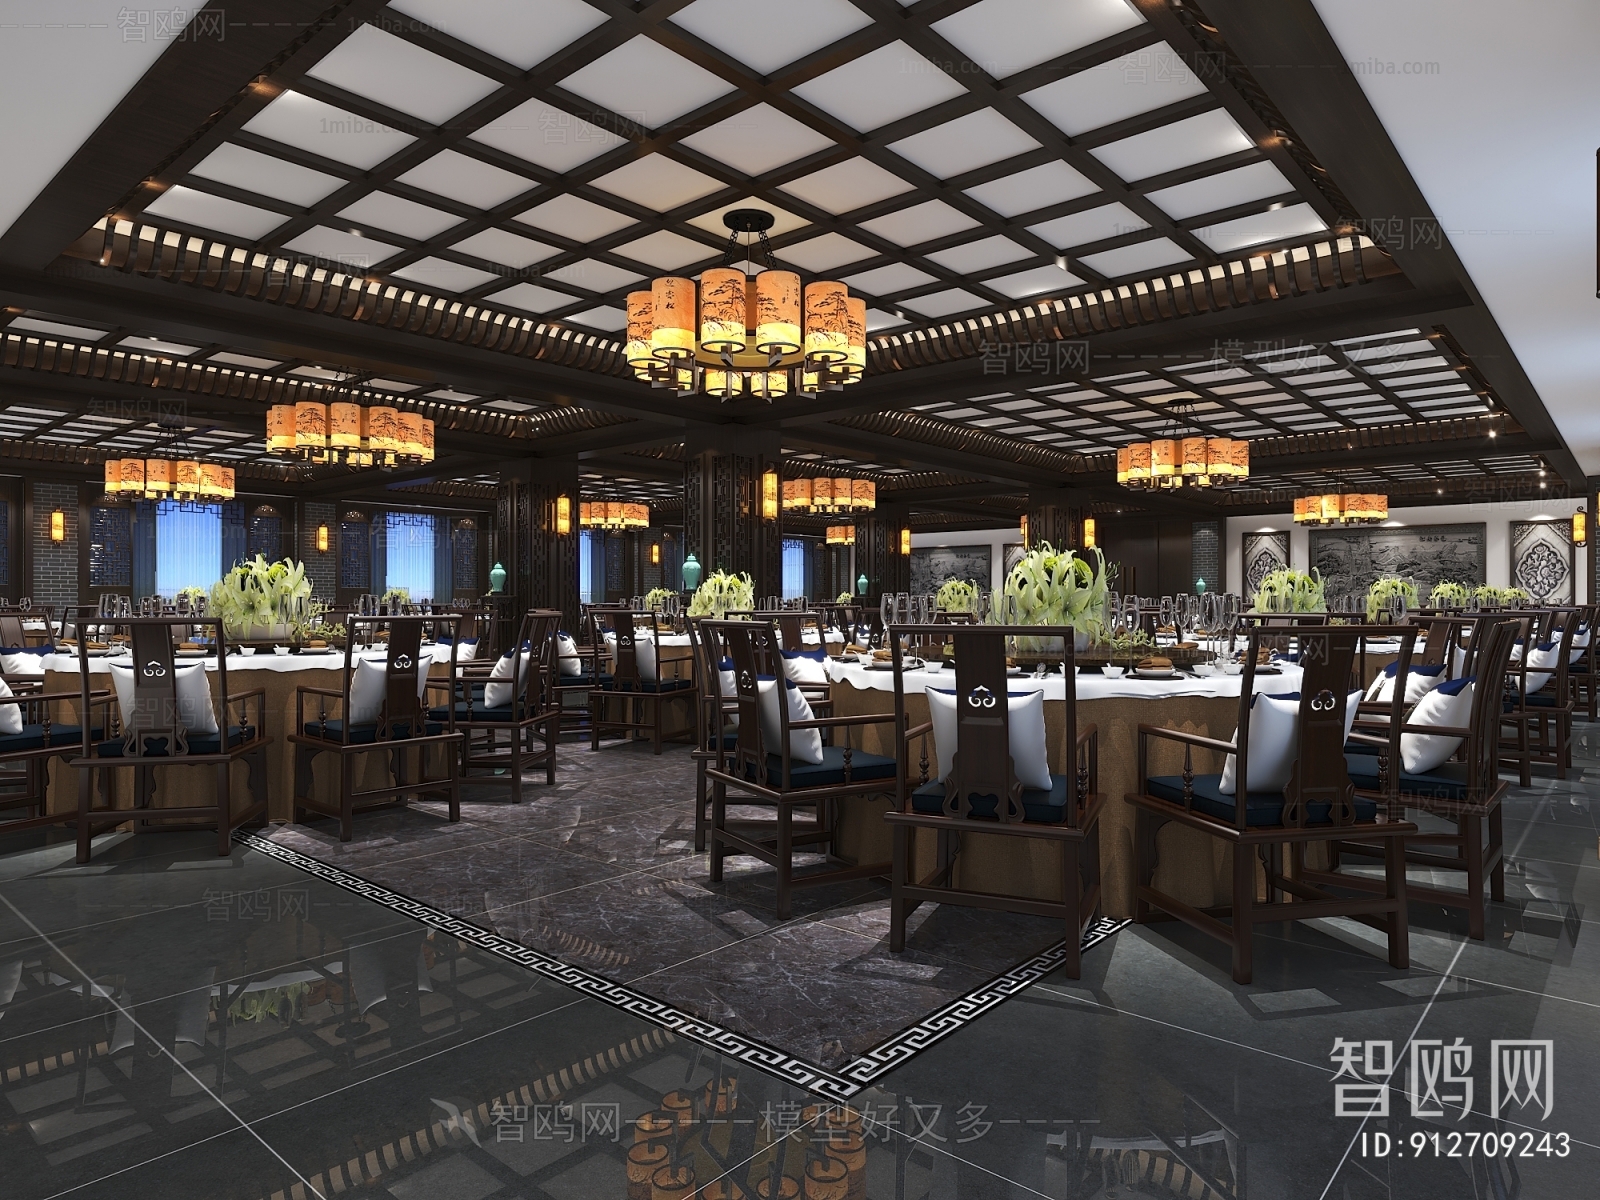 Chinese Style Banquet Hall